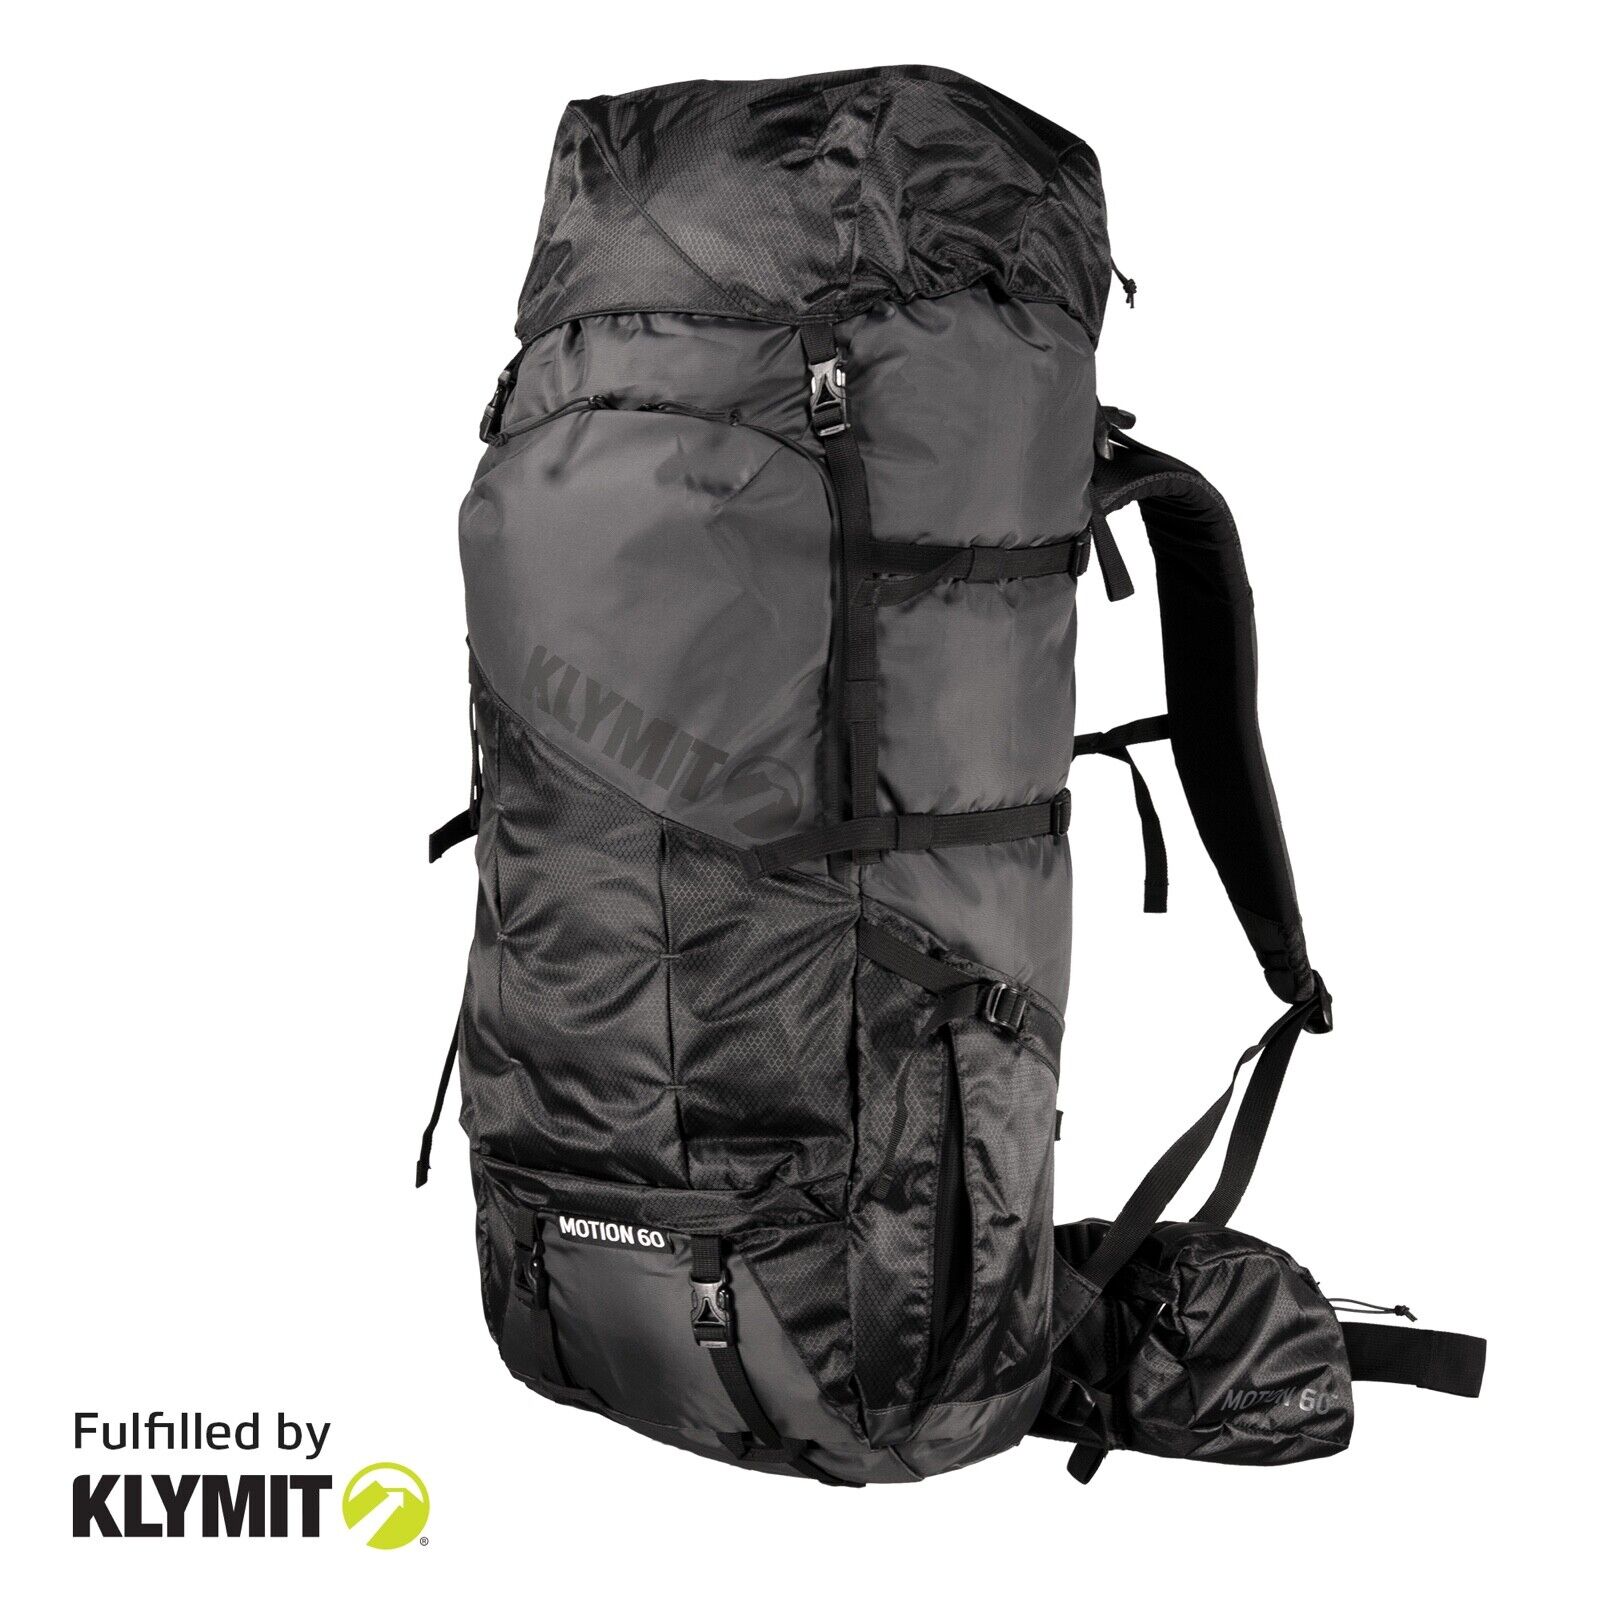 Klymit Motion 60 Backpack Ultra-Light Camping Backpacking- Certified Refurbished